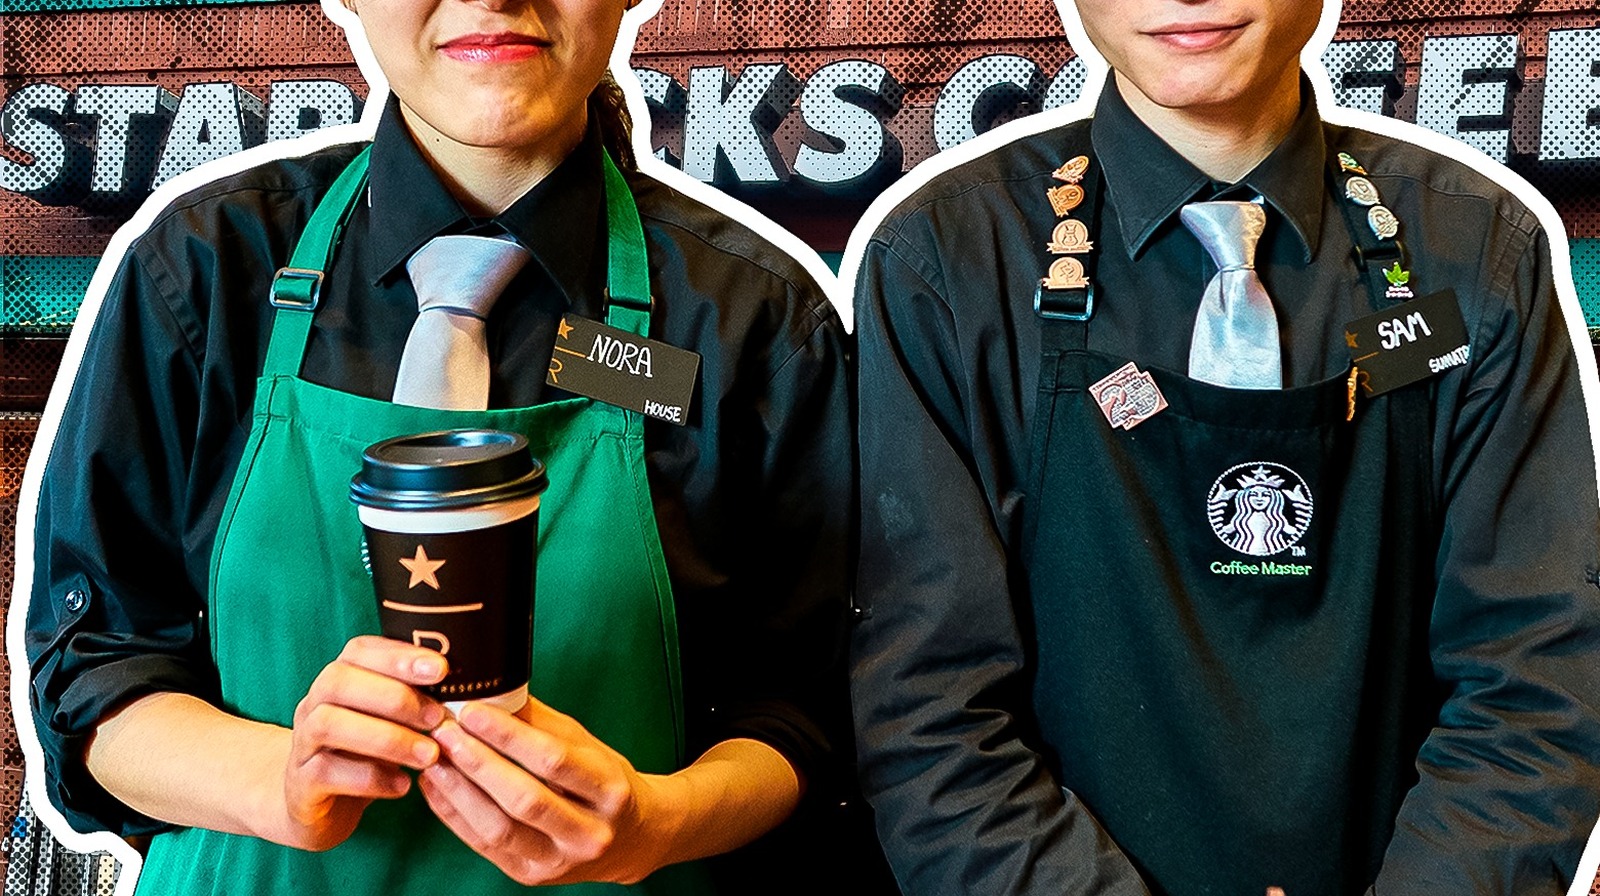 https://www.thedailymeal.com/img/gallery/what-its-really-like-to-work-at-starbucks-according-to-employees/l-intro-1689102005.jpg